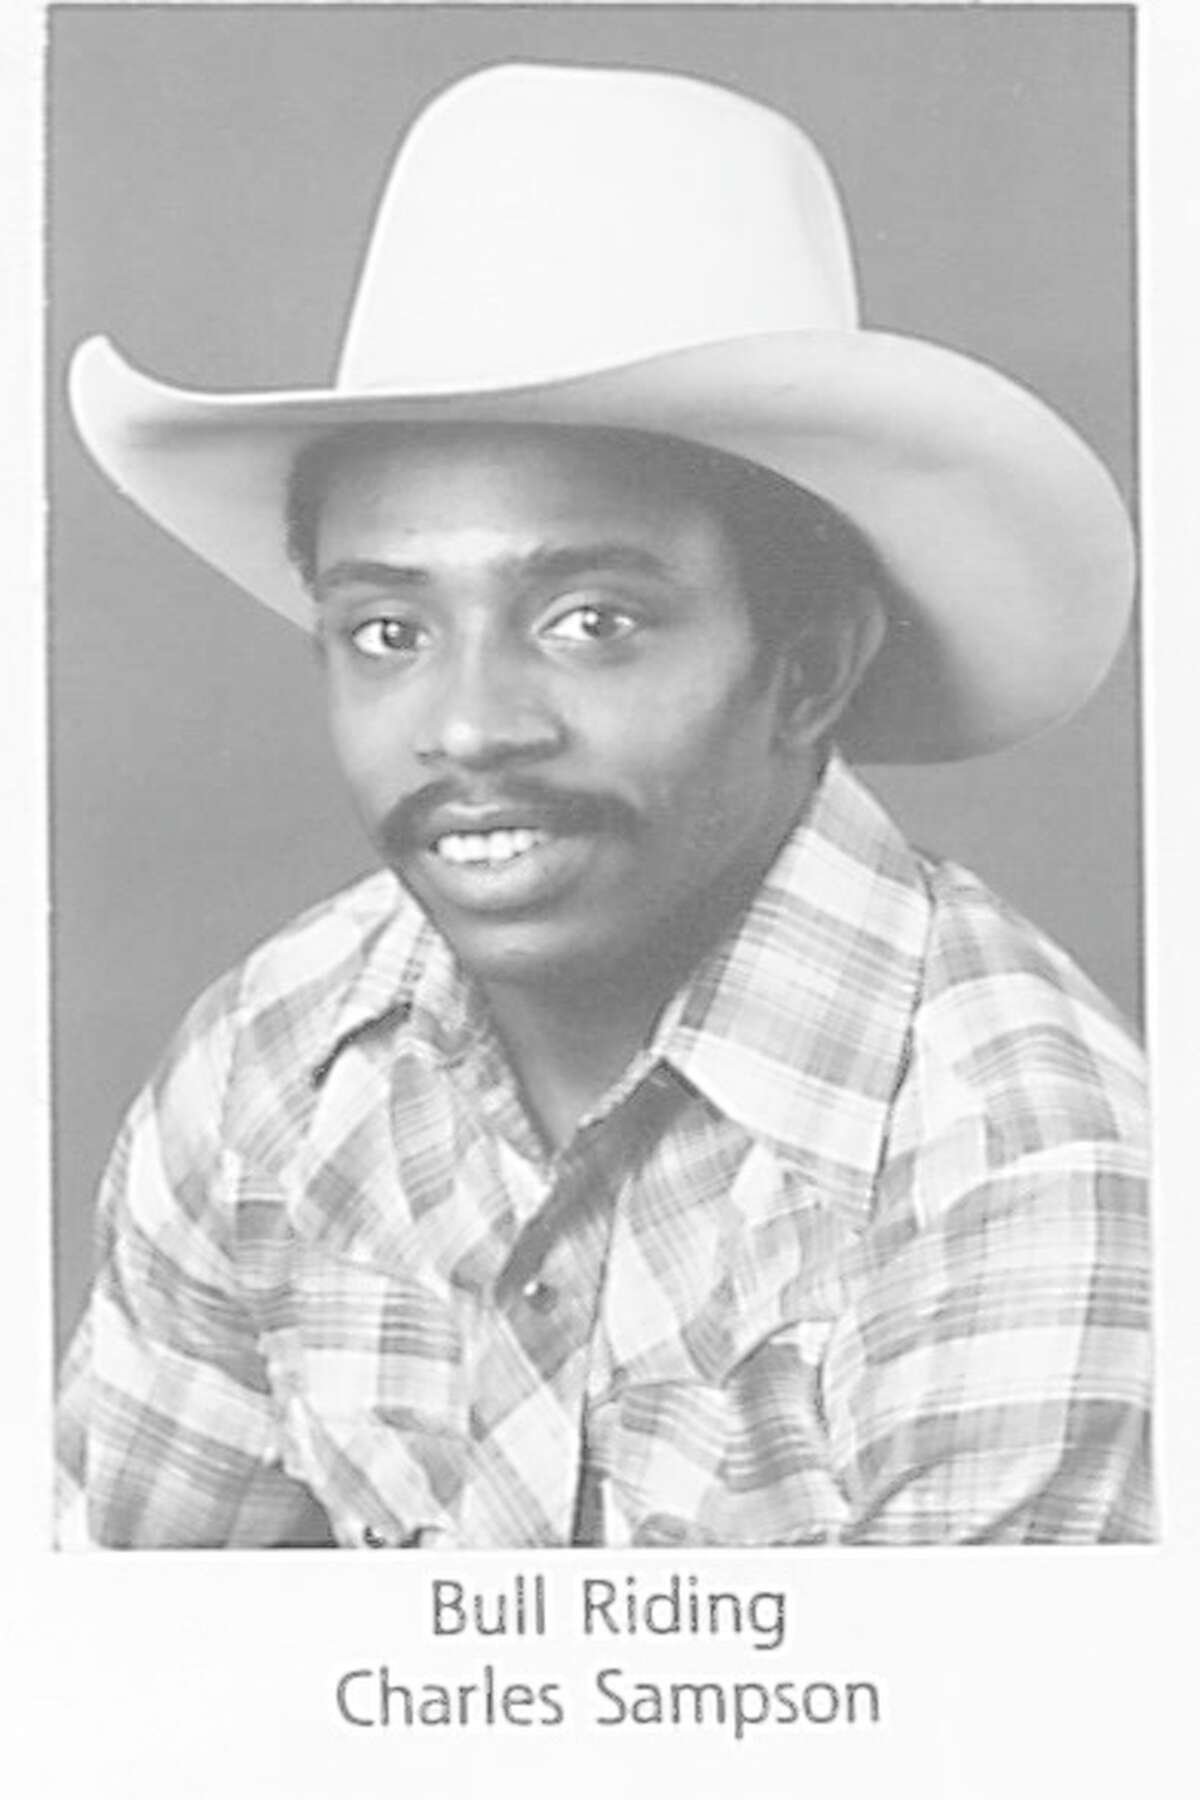 Cowboy:  Charles Sampson Year Competed: 1983 Competition: Bull Riding